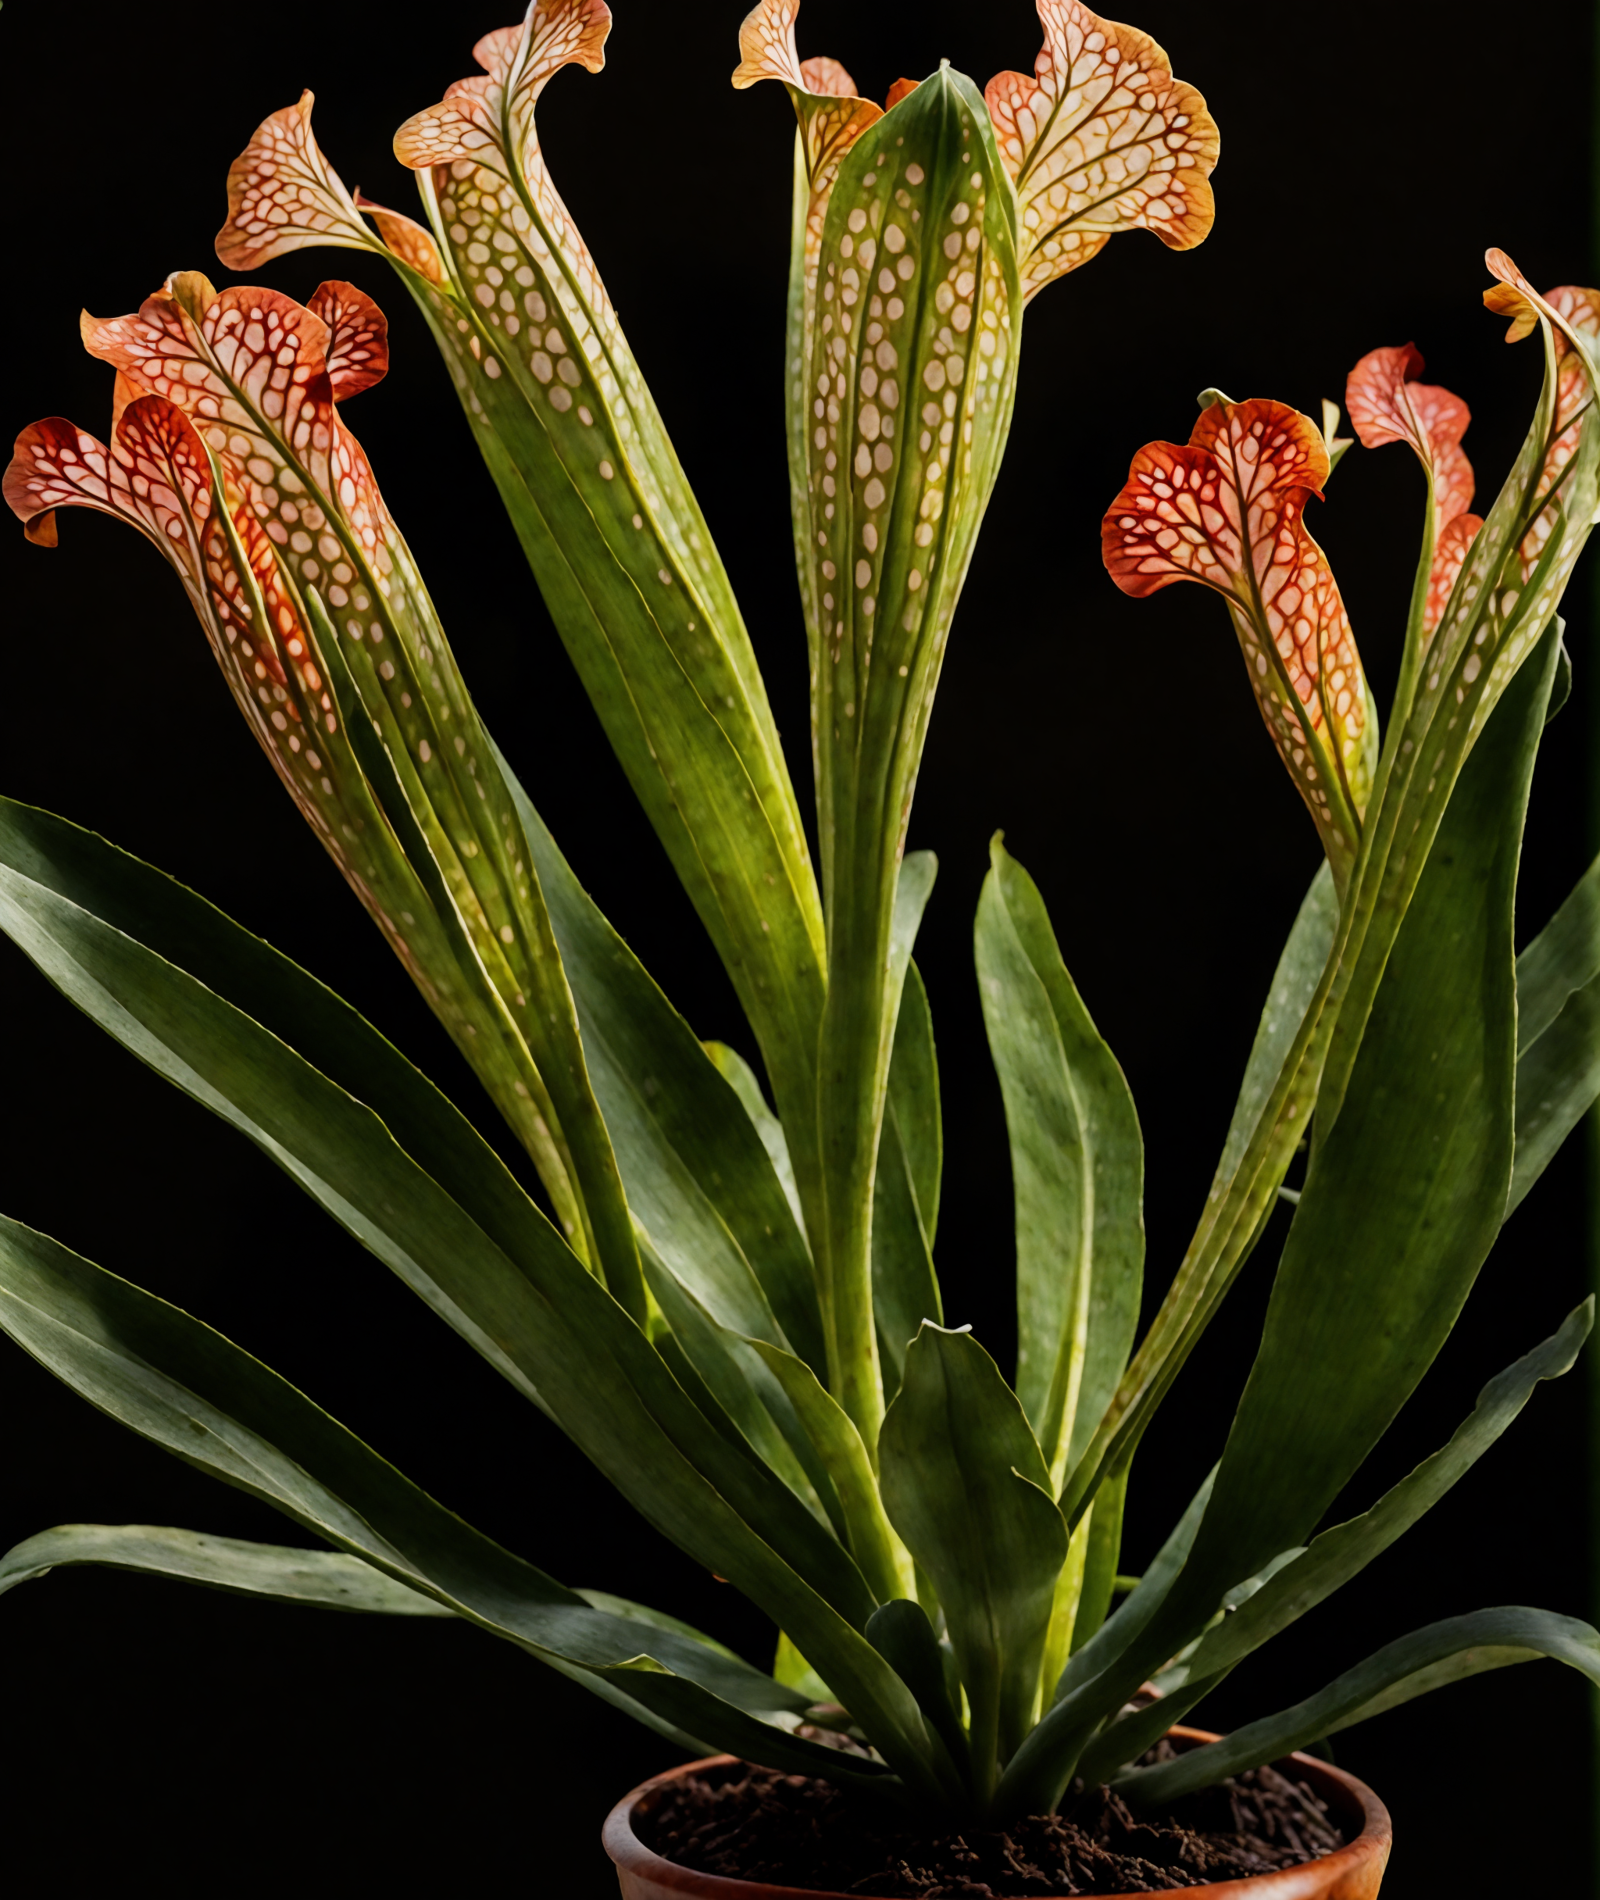 Three Sarracenia leucophylla flowers in a bowl, with clear lighting and a dark background.